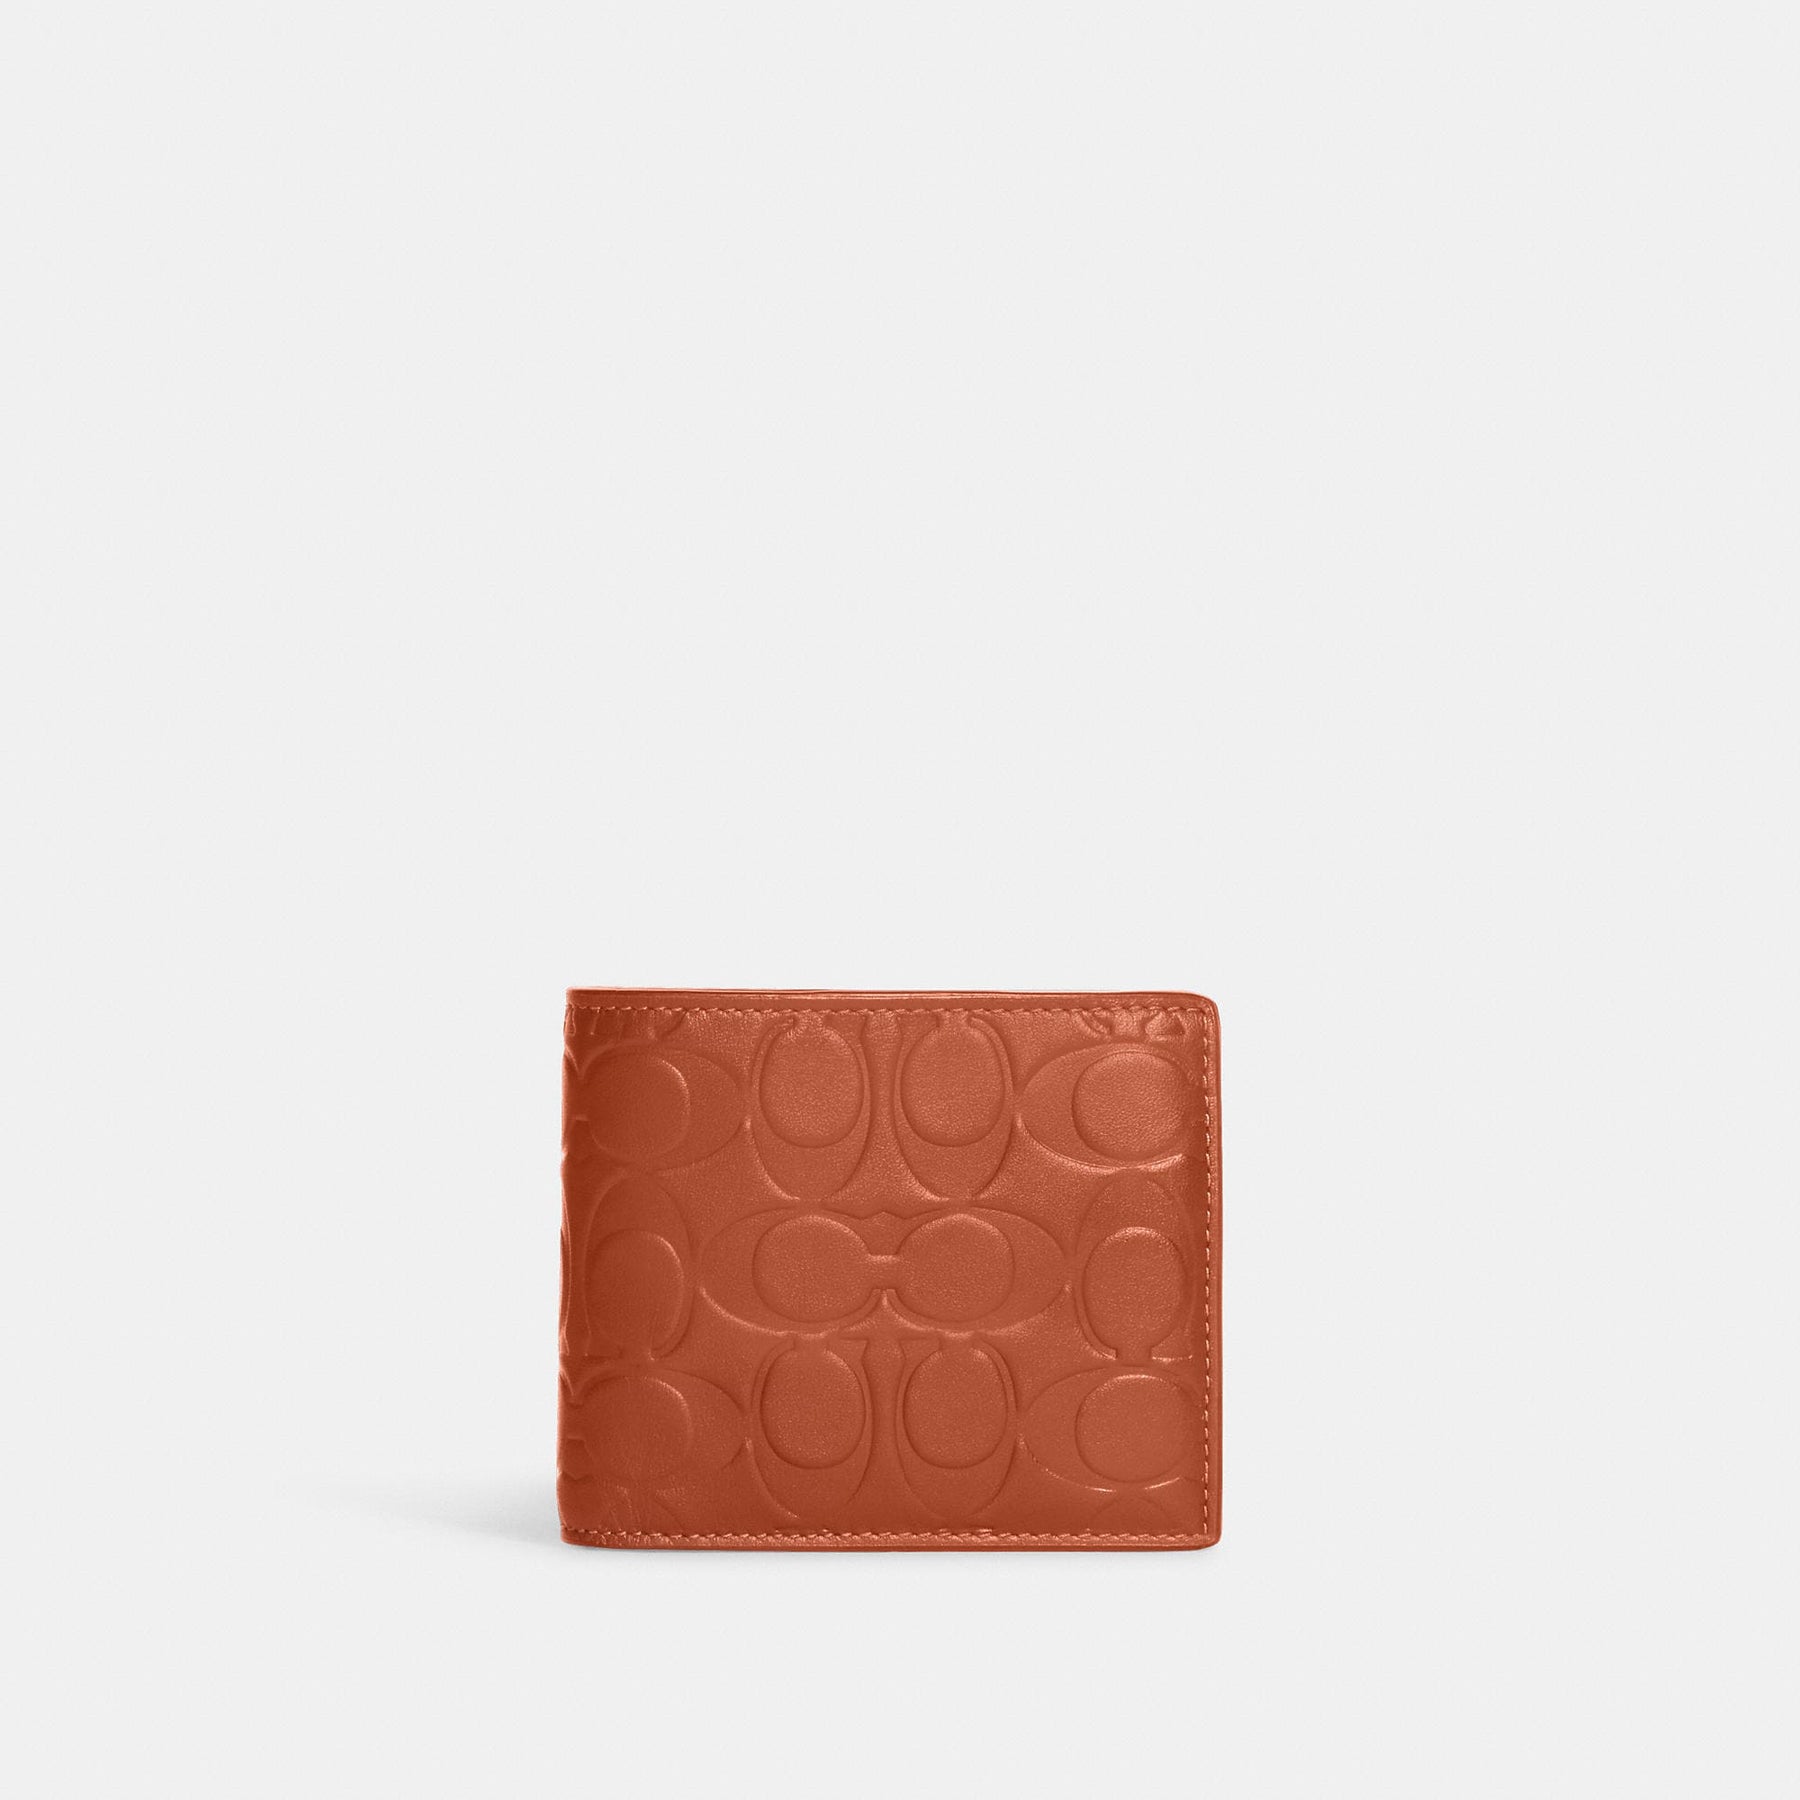 Coach 3 In 1 Wallet In Signature Leather